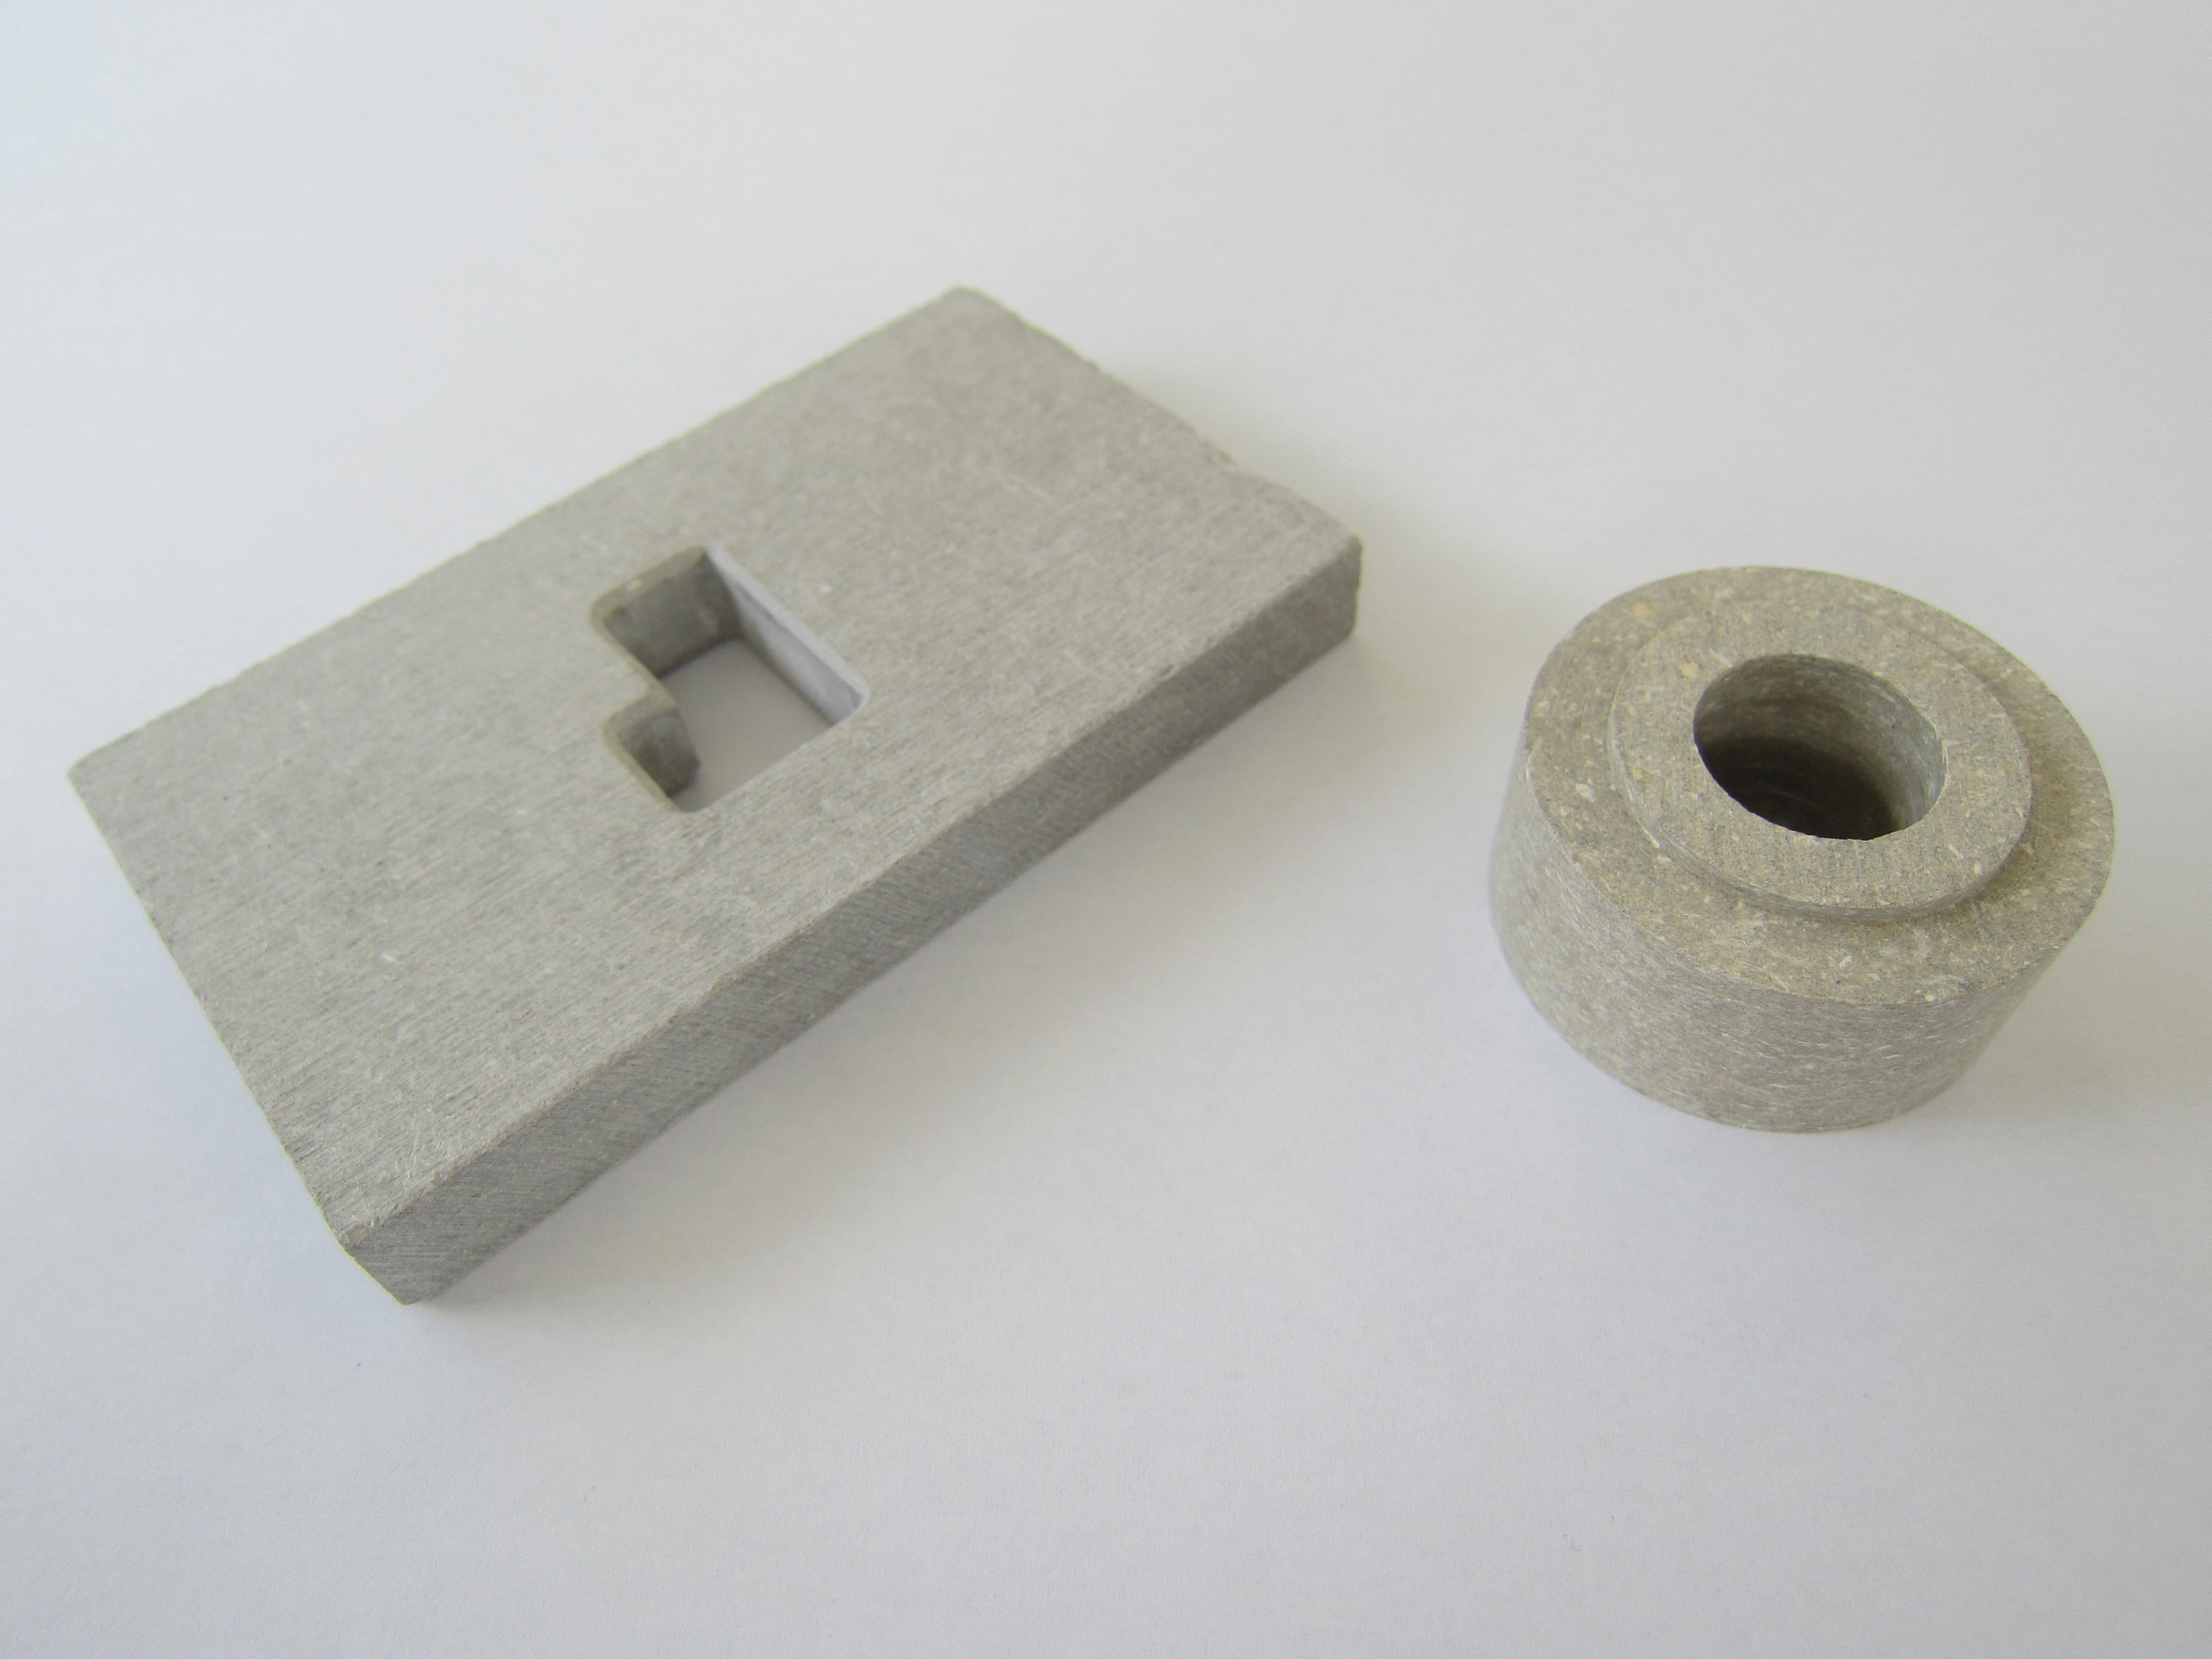 Thermal insulation material made in Japan